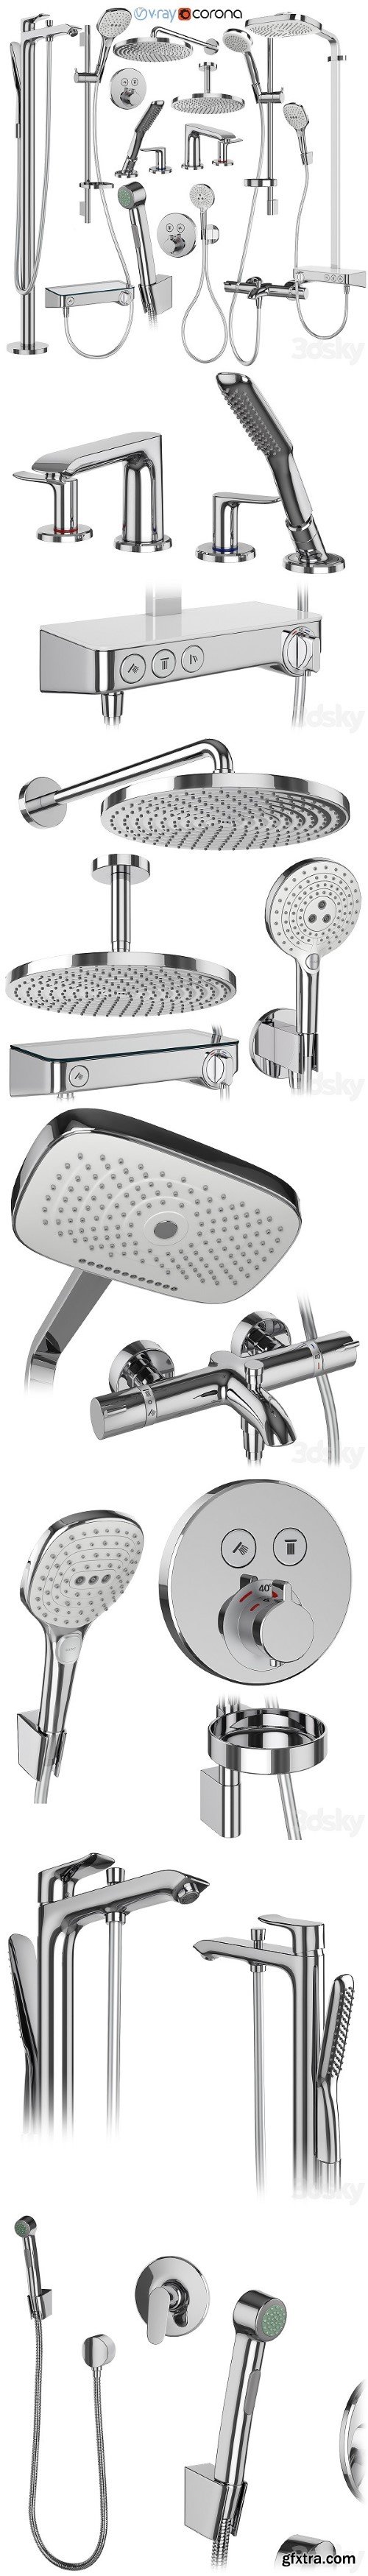 Hansgrohe Set 173 Mixers and Shower Systems